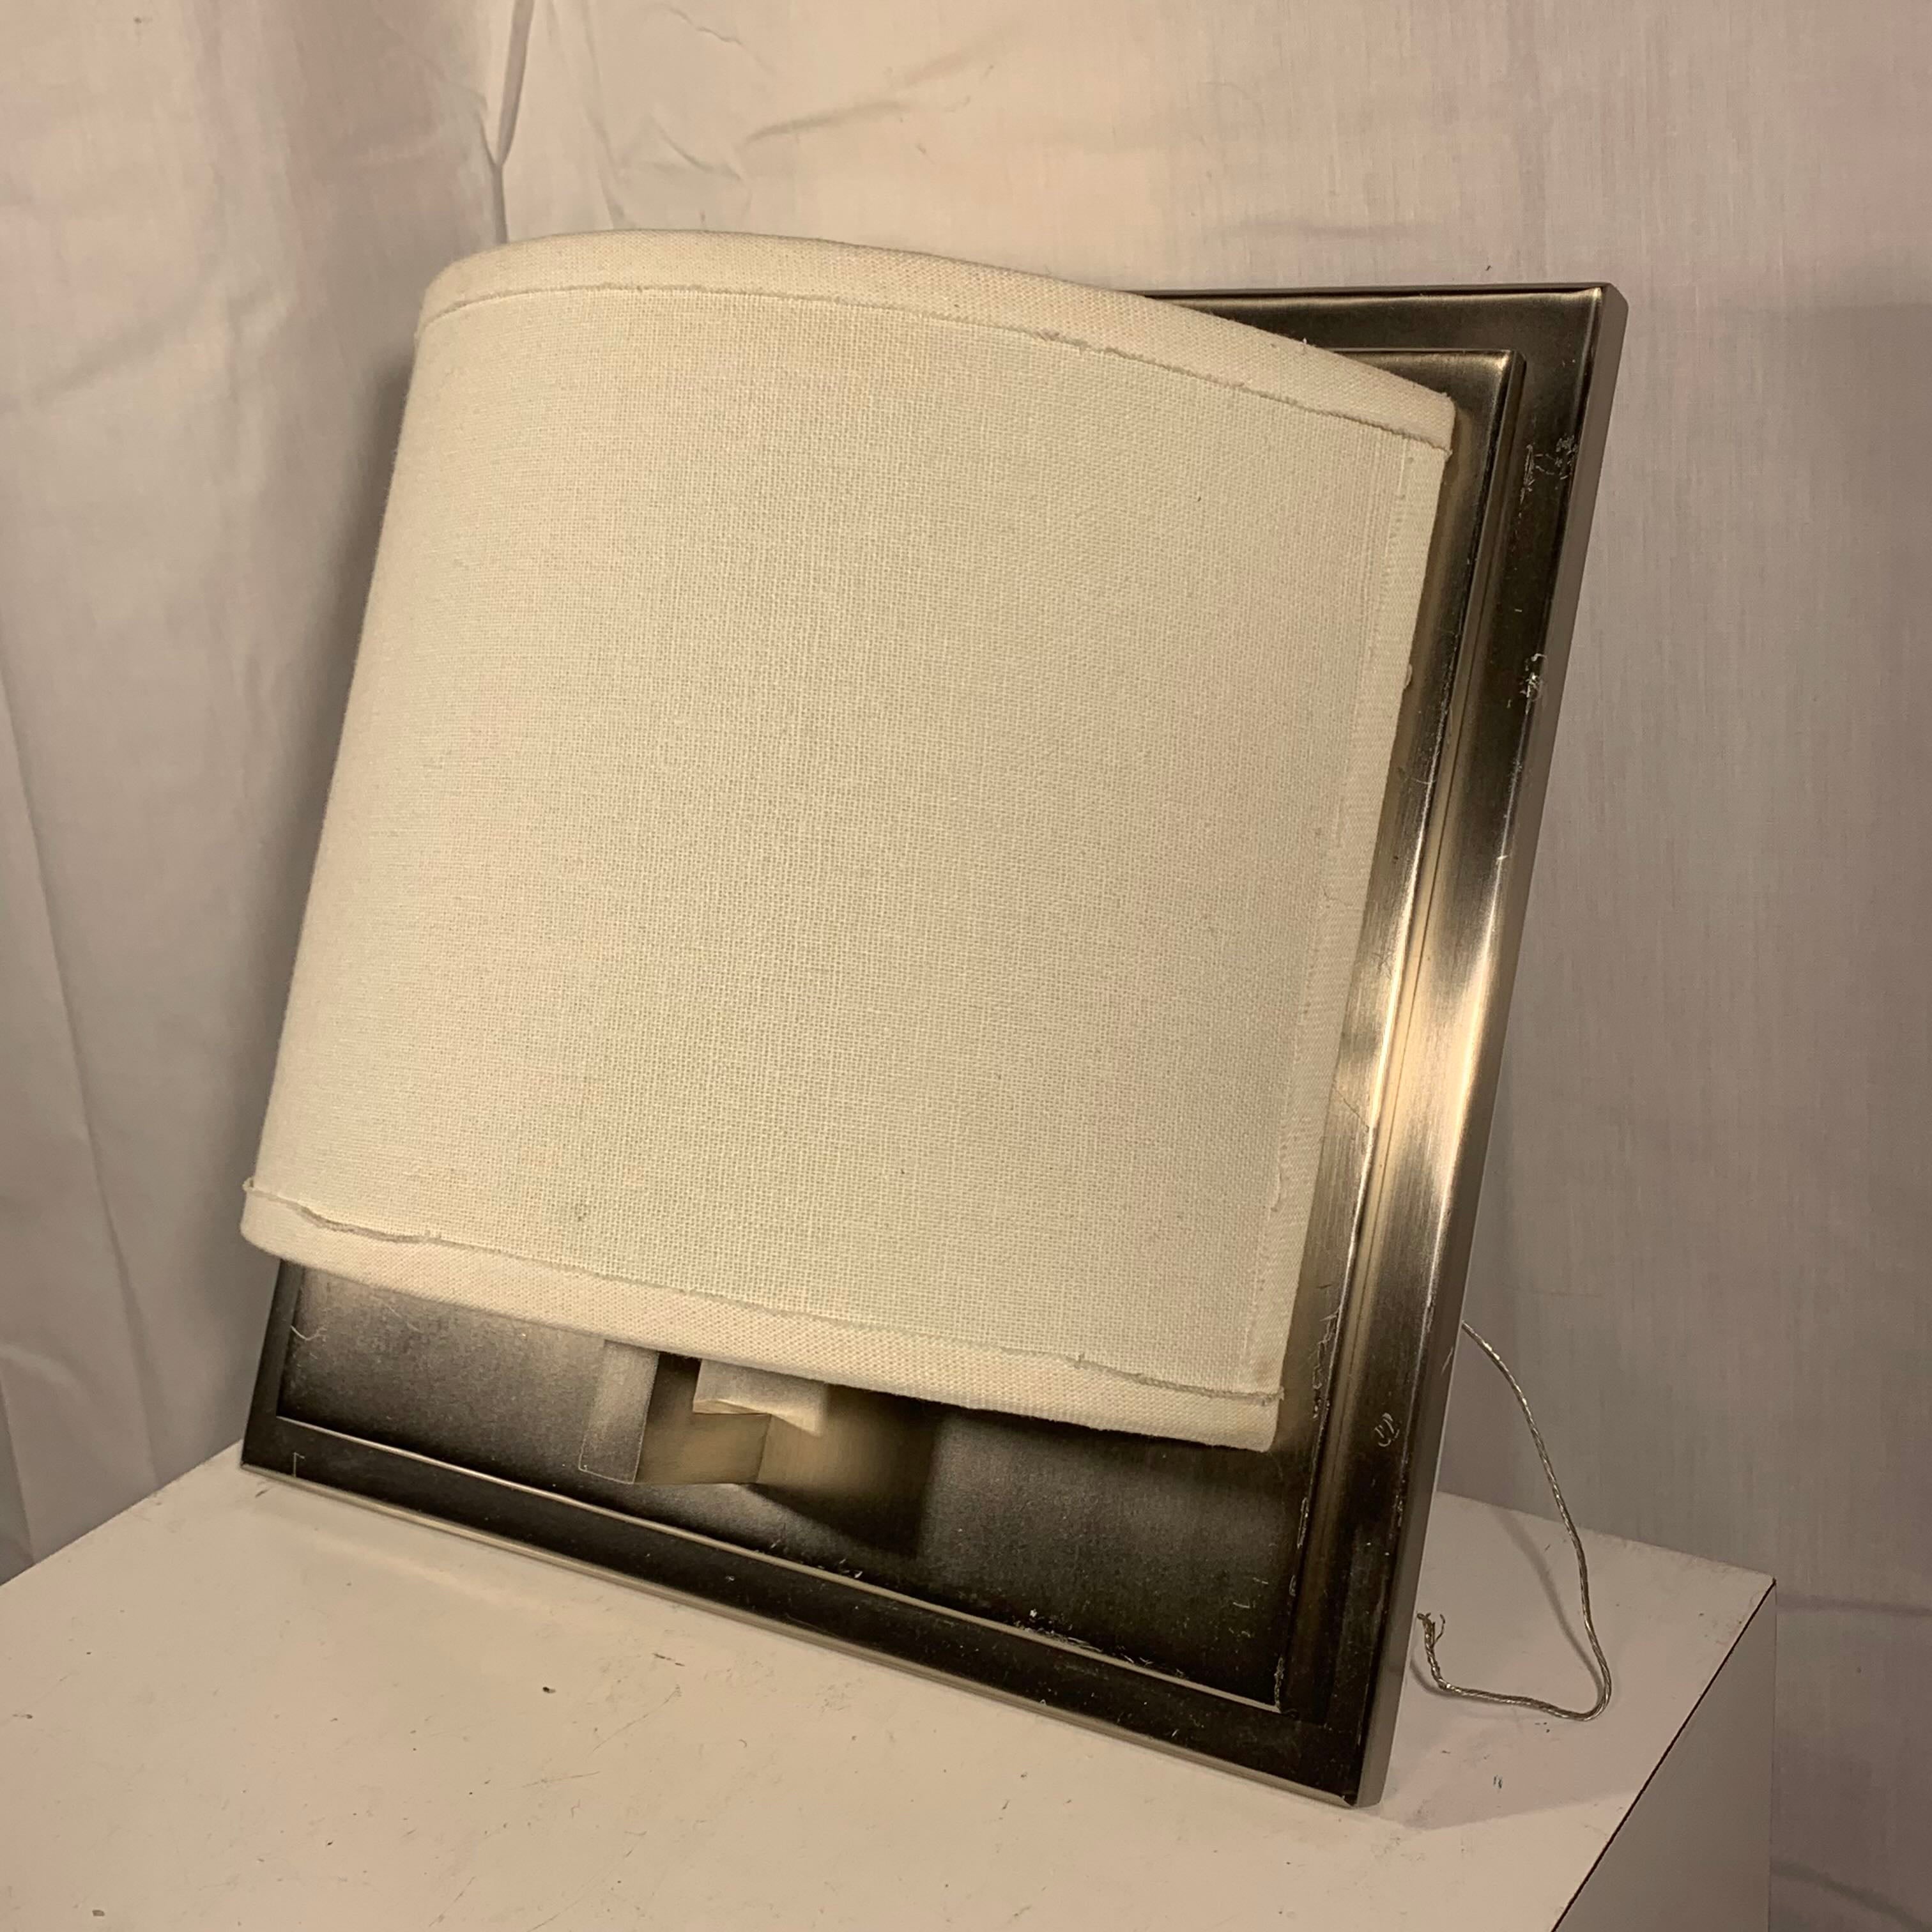 10"x 4"x 10" Louis Baldinger and Sons Silver Metal with Half Shade Wall Sconce